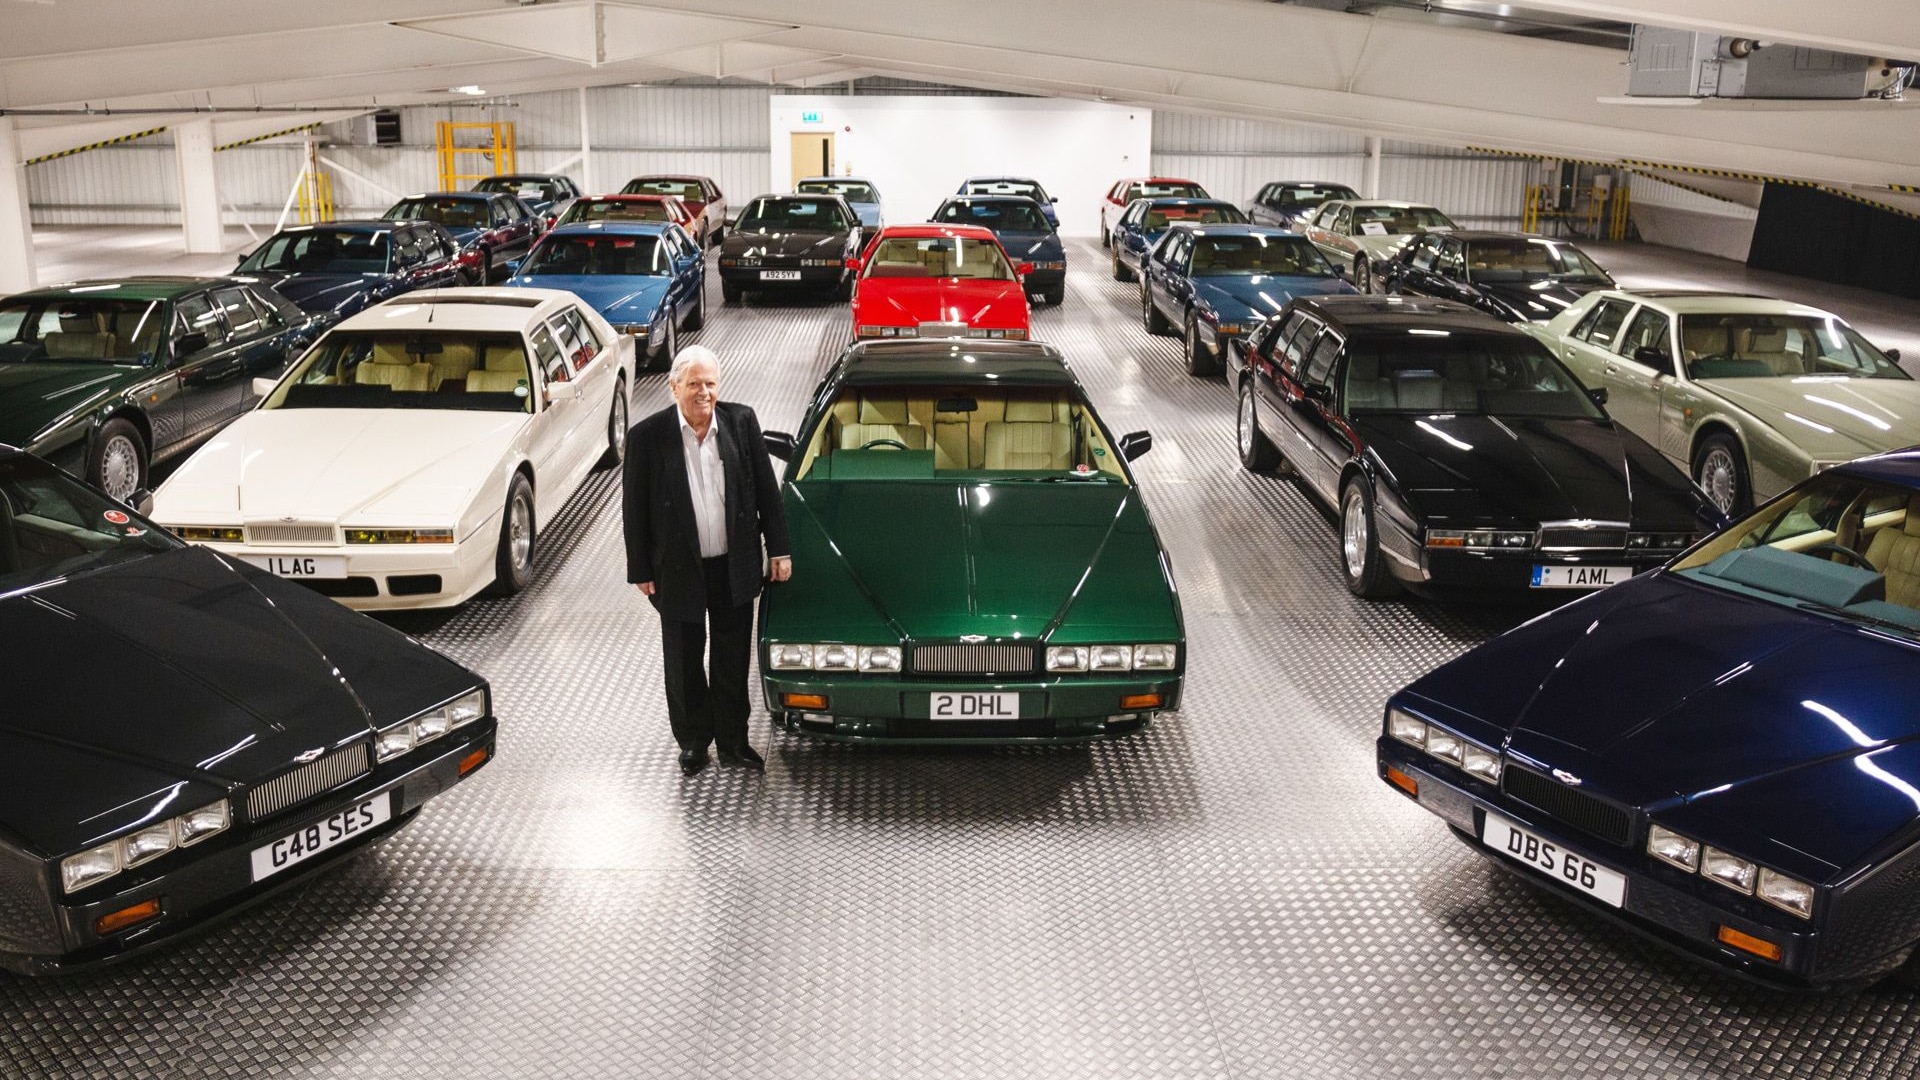 Rodger Dudding, owner of Studio 434 car collection